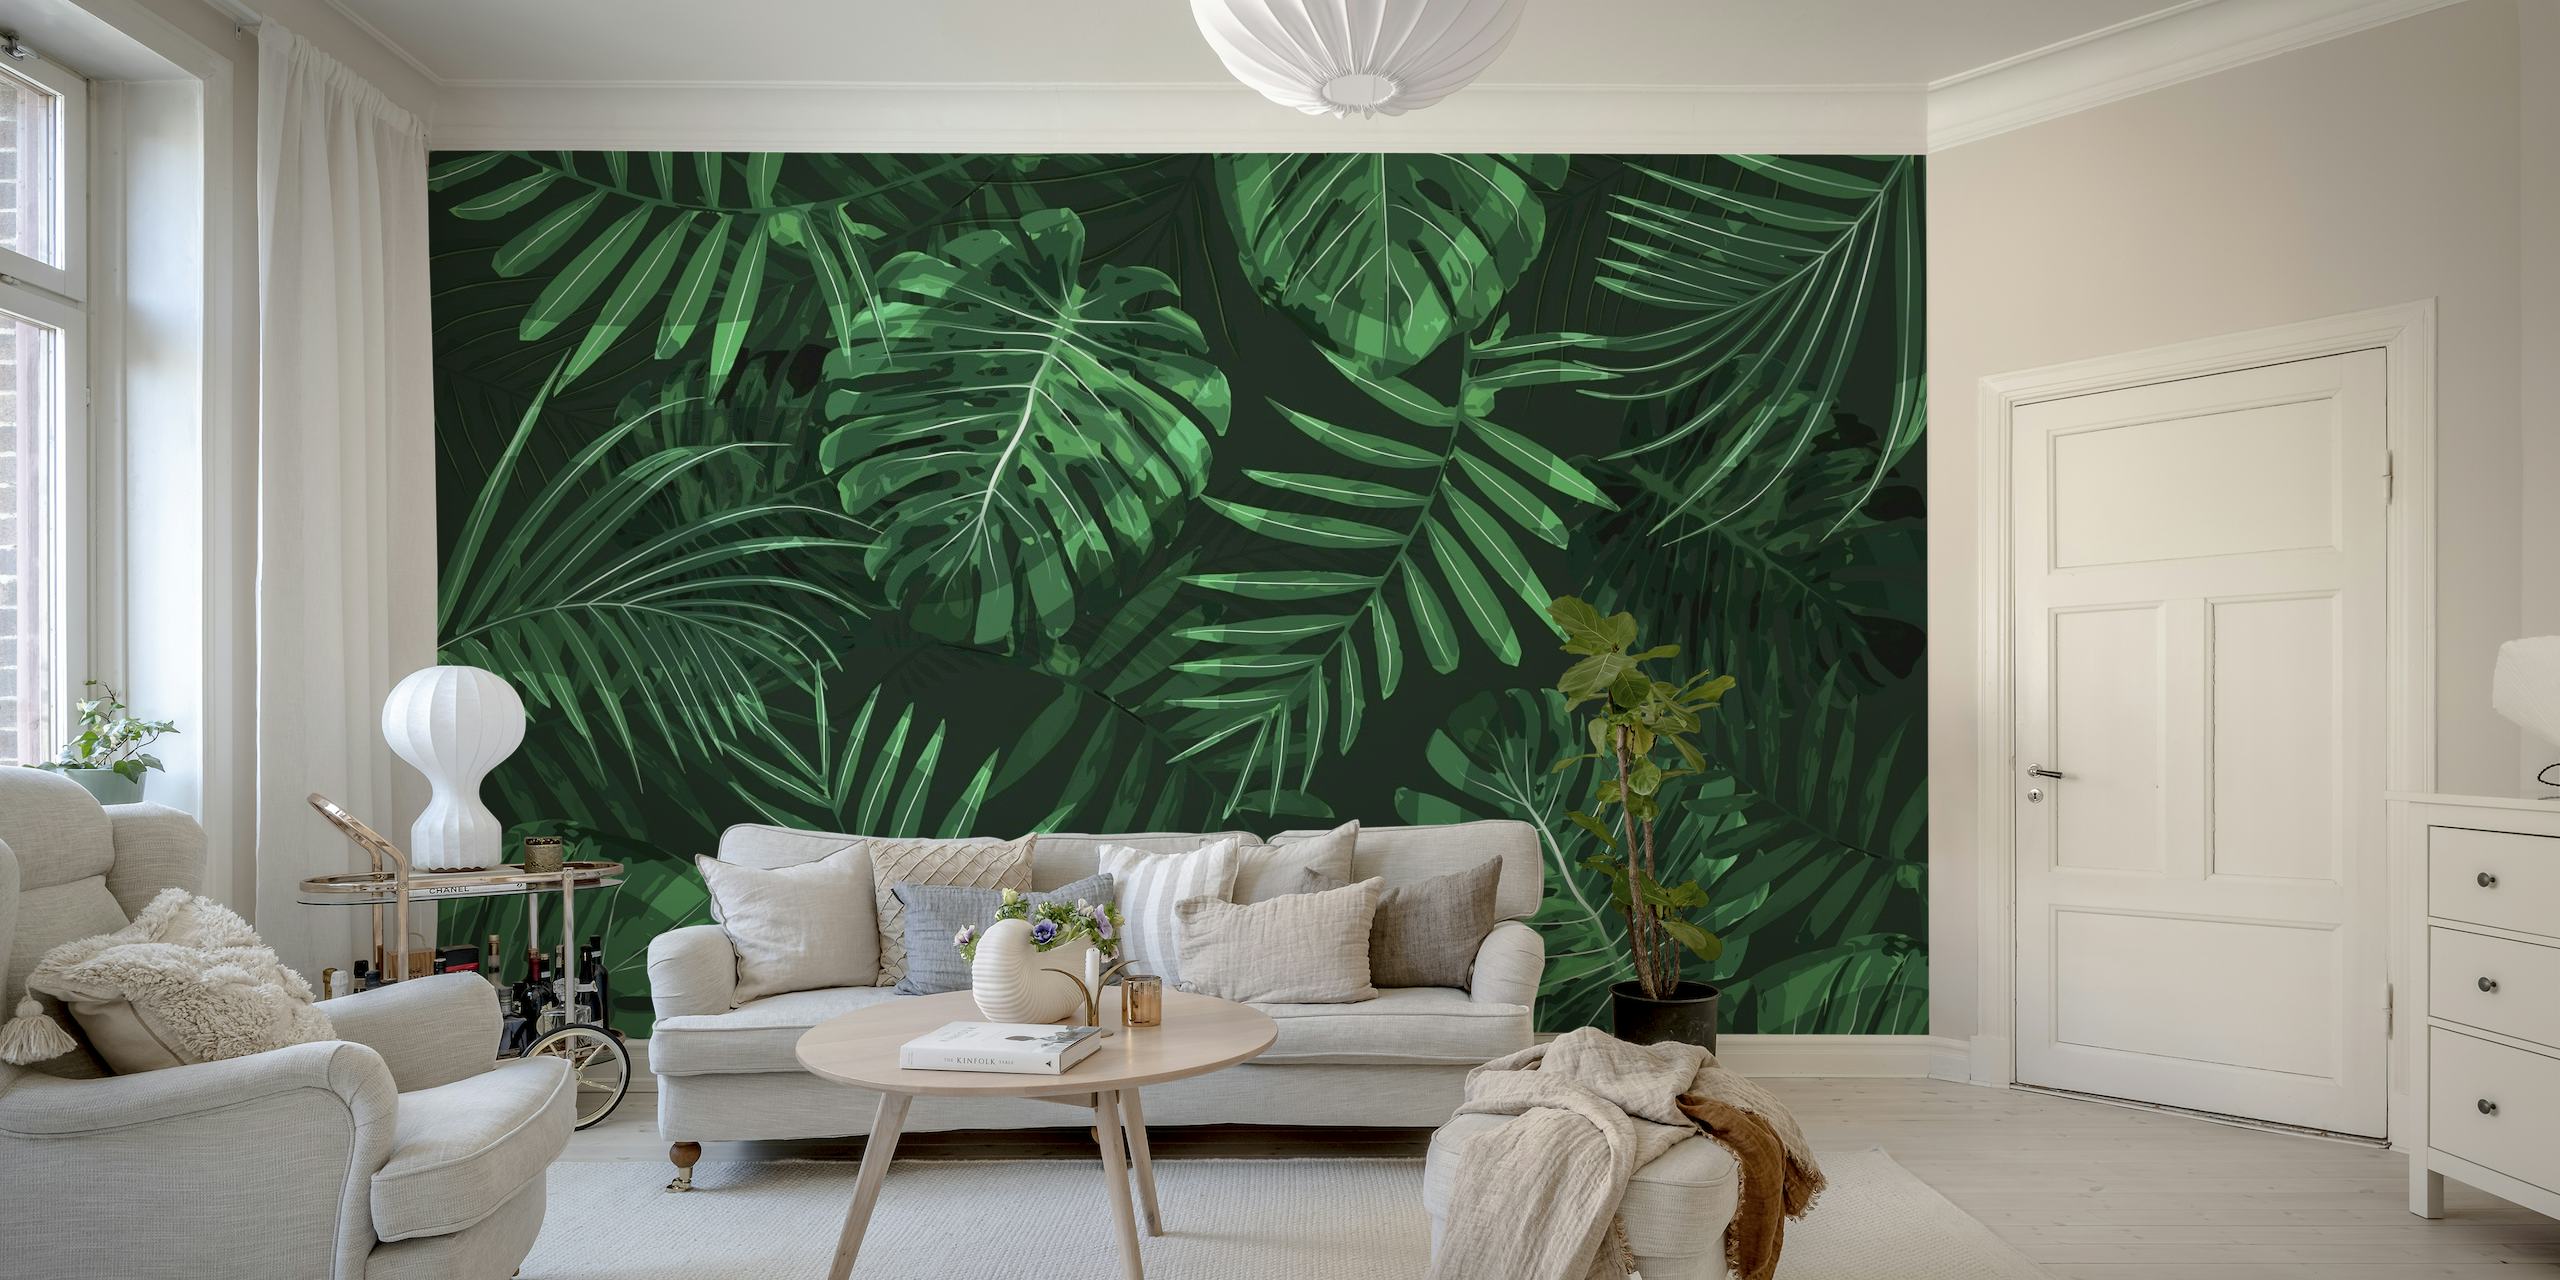 Green Monstera and palm leaves wall mural on a dark background.